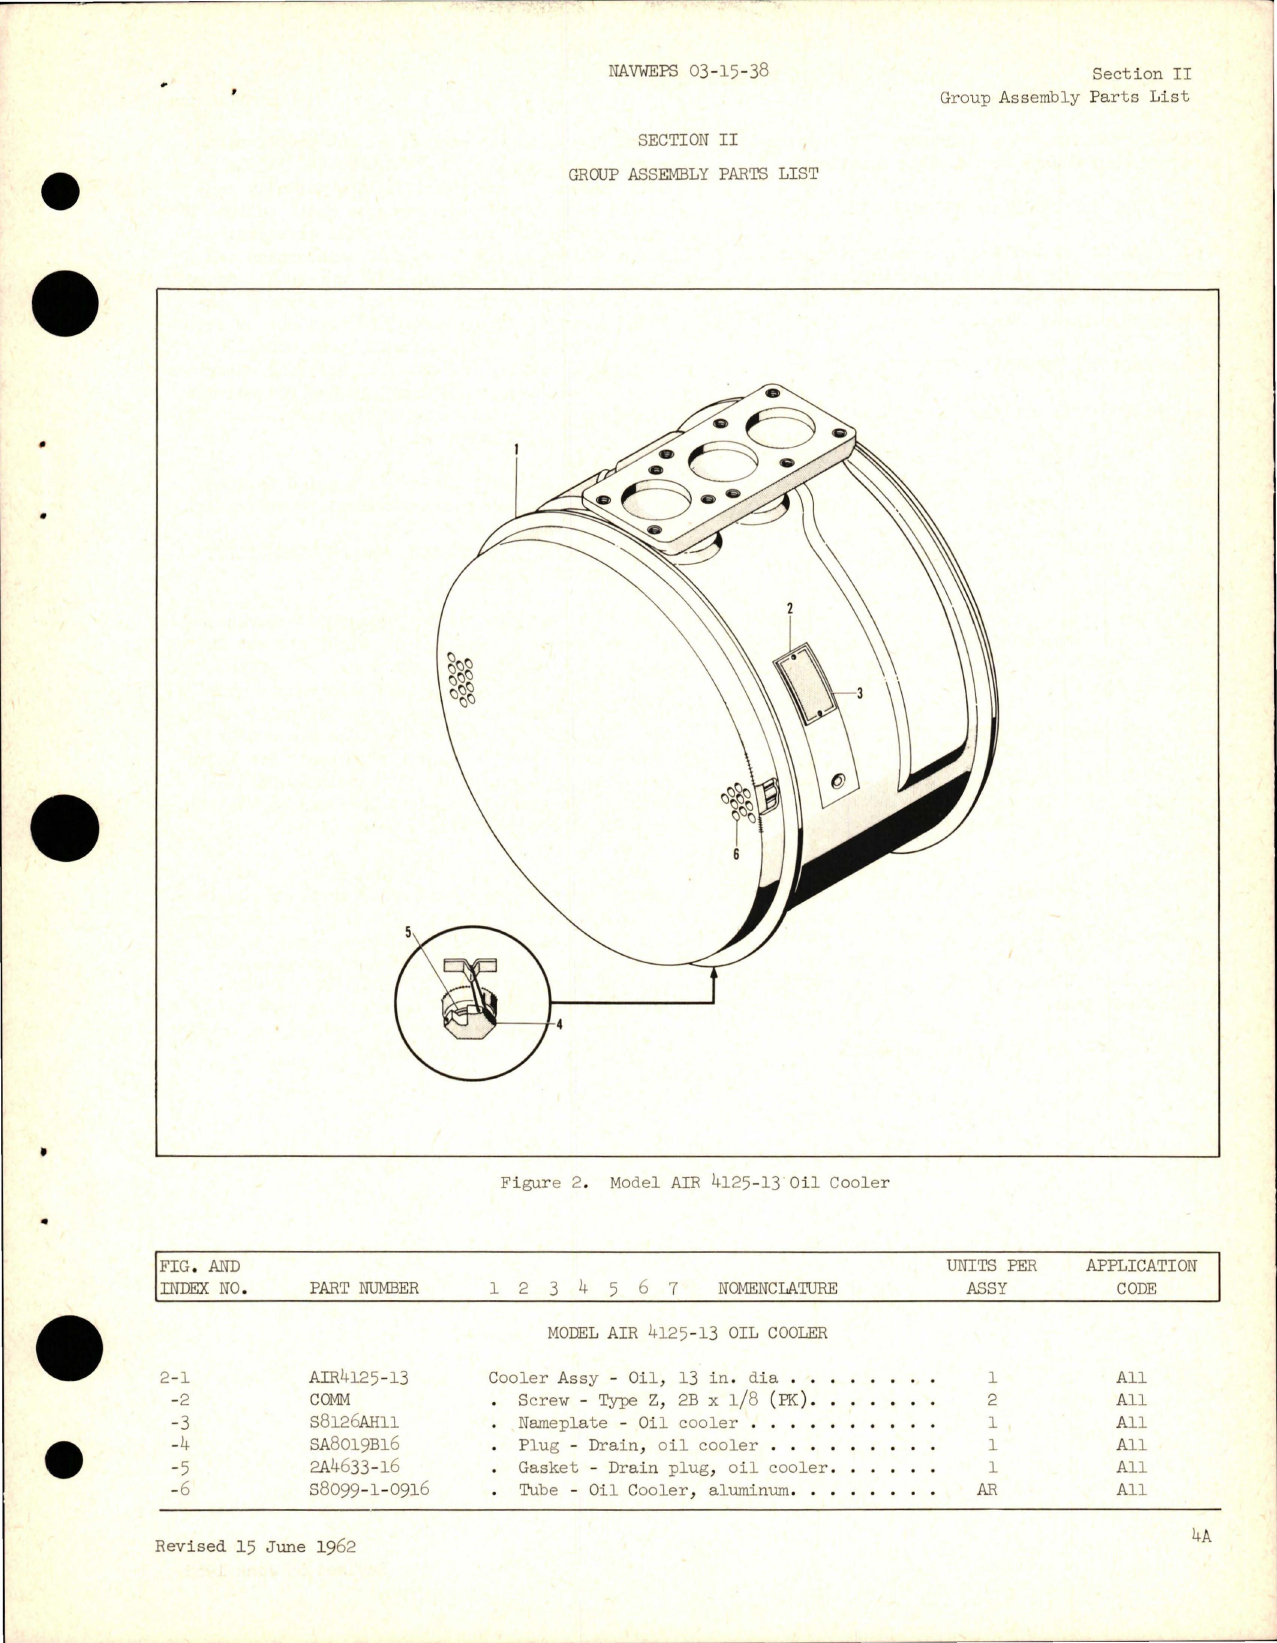 Sample page 7 from AirCorps Library document: Parts Catalog for Oil Temperature Regulators, Oil Coolers Valves